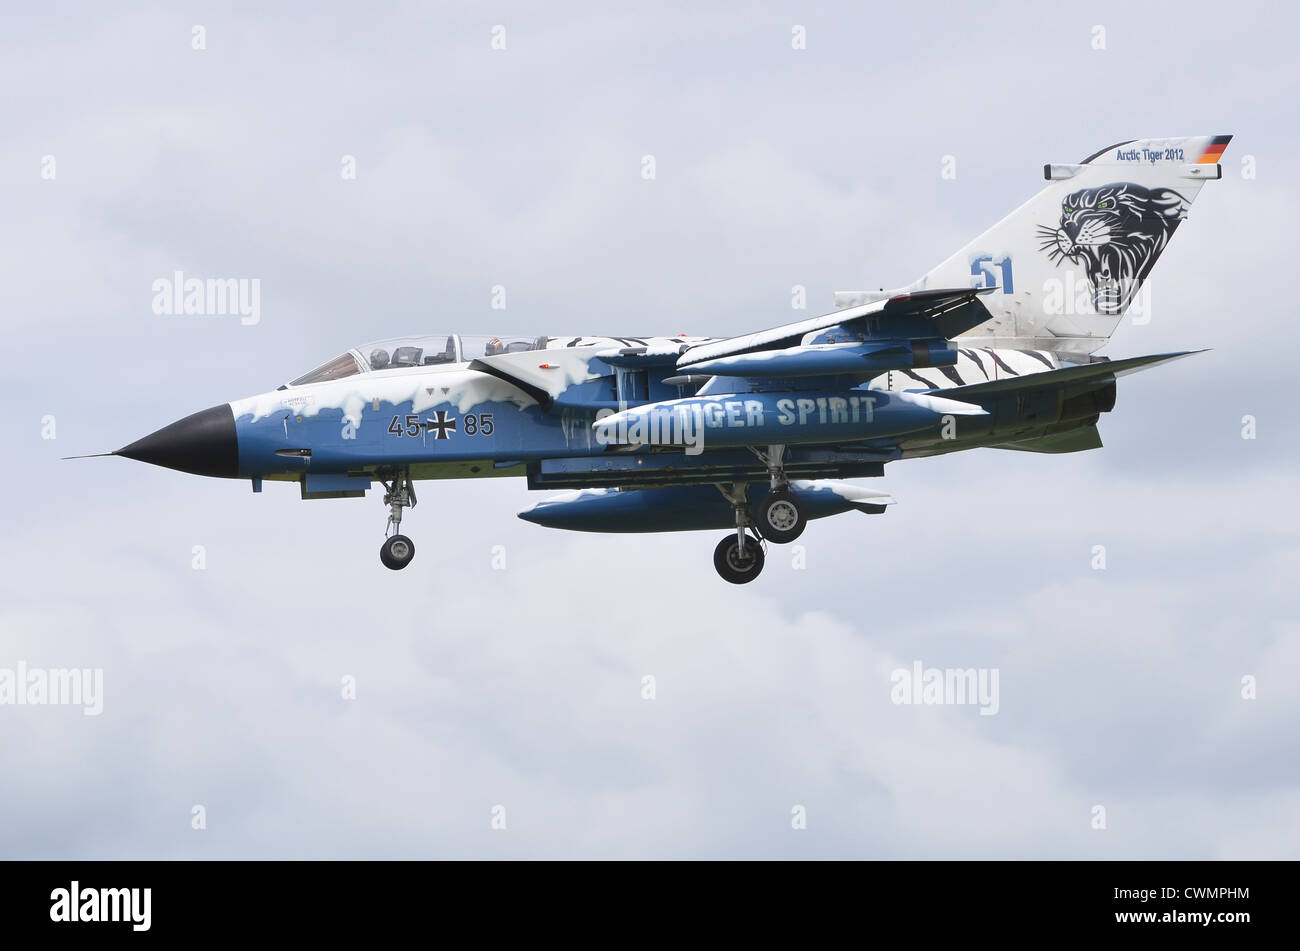 Panavia Tornado IDS in Arctic Tiger 2012 markings, operated by the German Air Force, on approach for landing at RAF Fairford Stock Photo